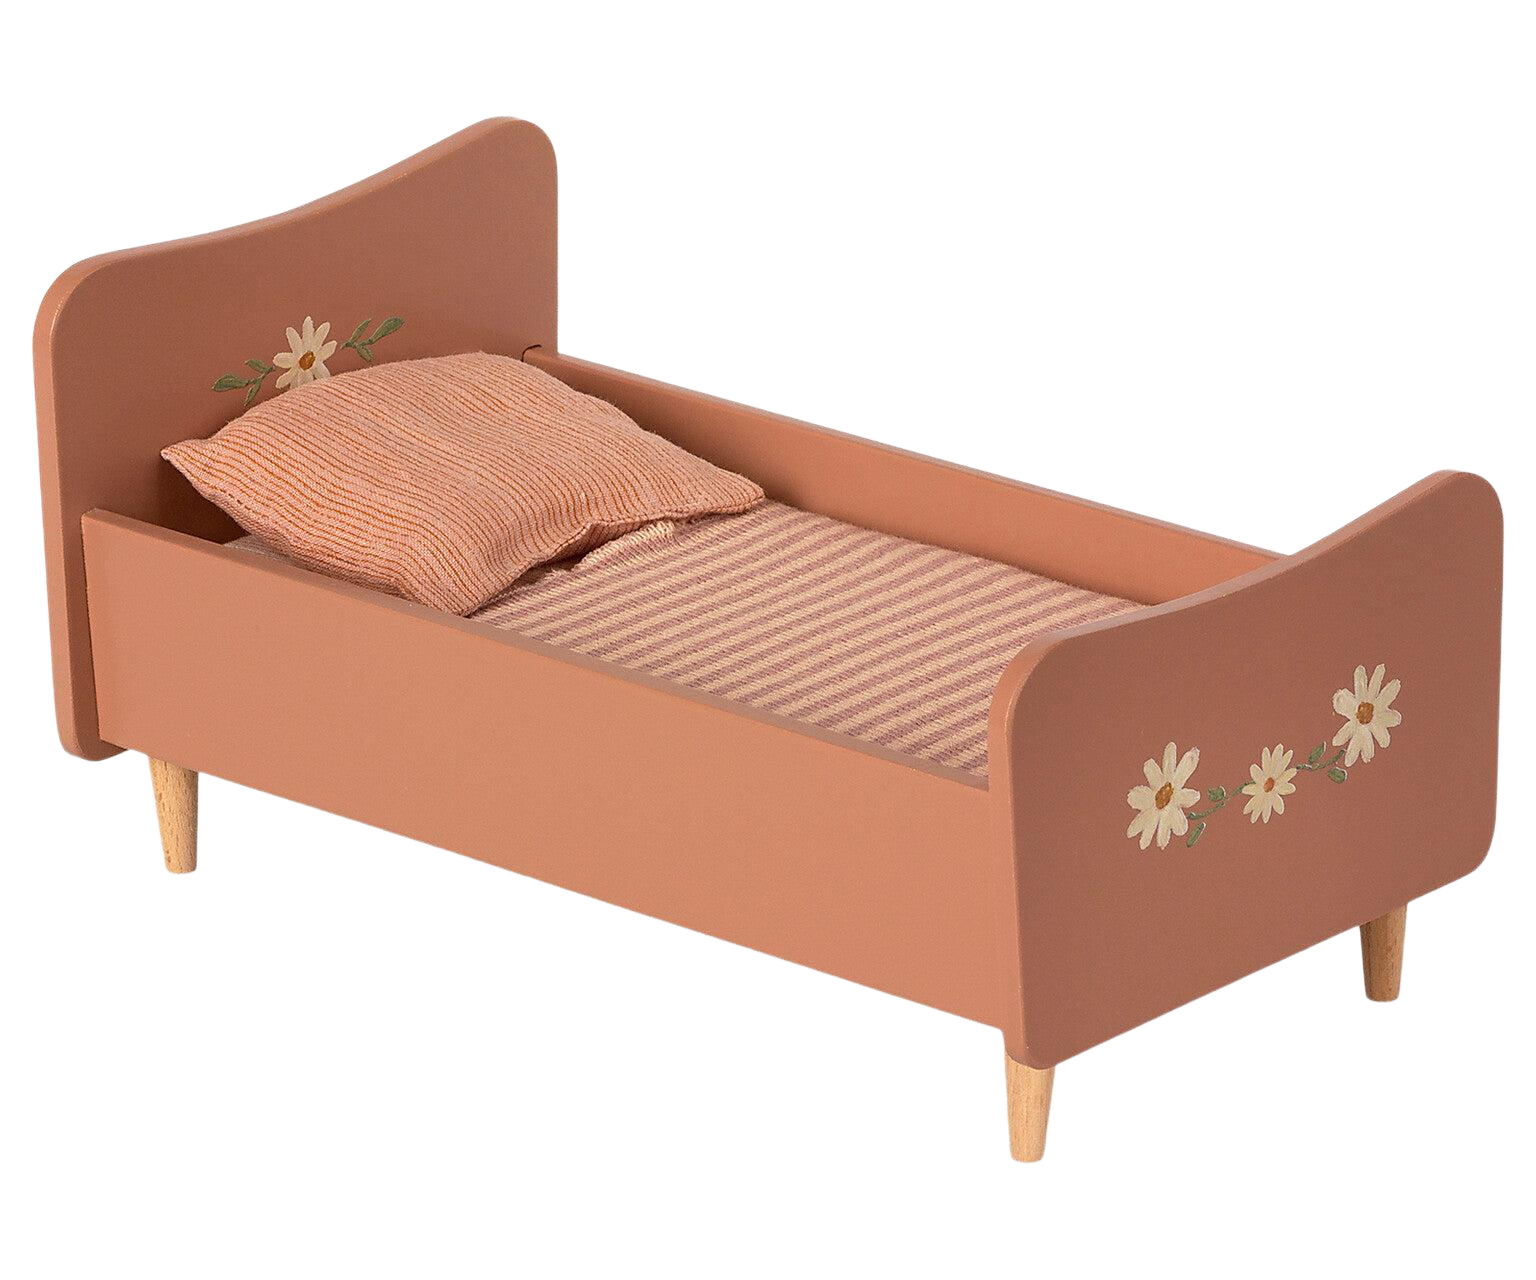 Wooden Bed, Miniature - Rose